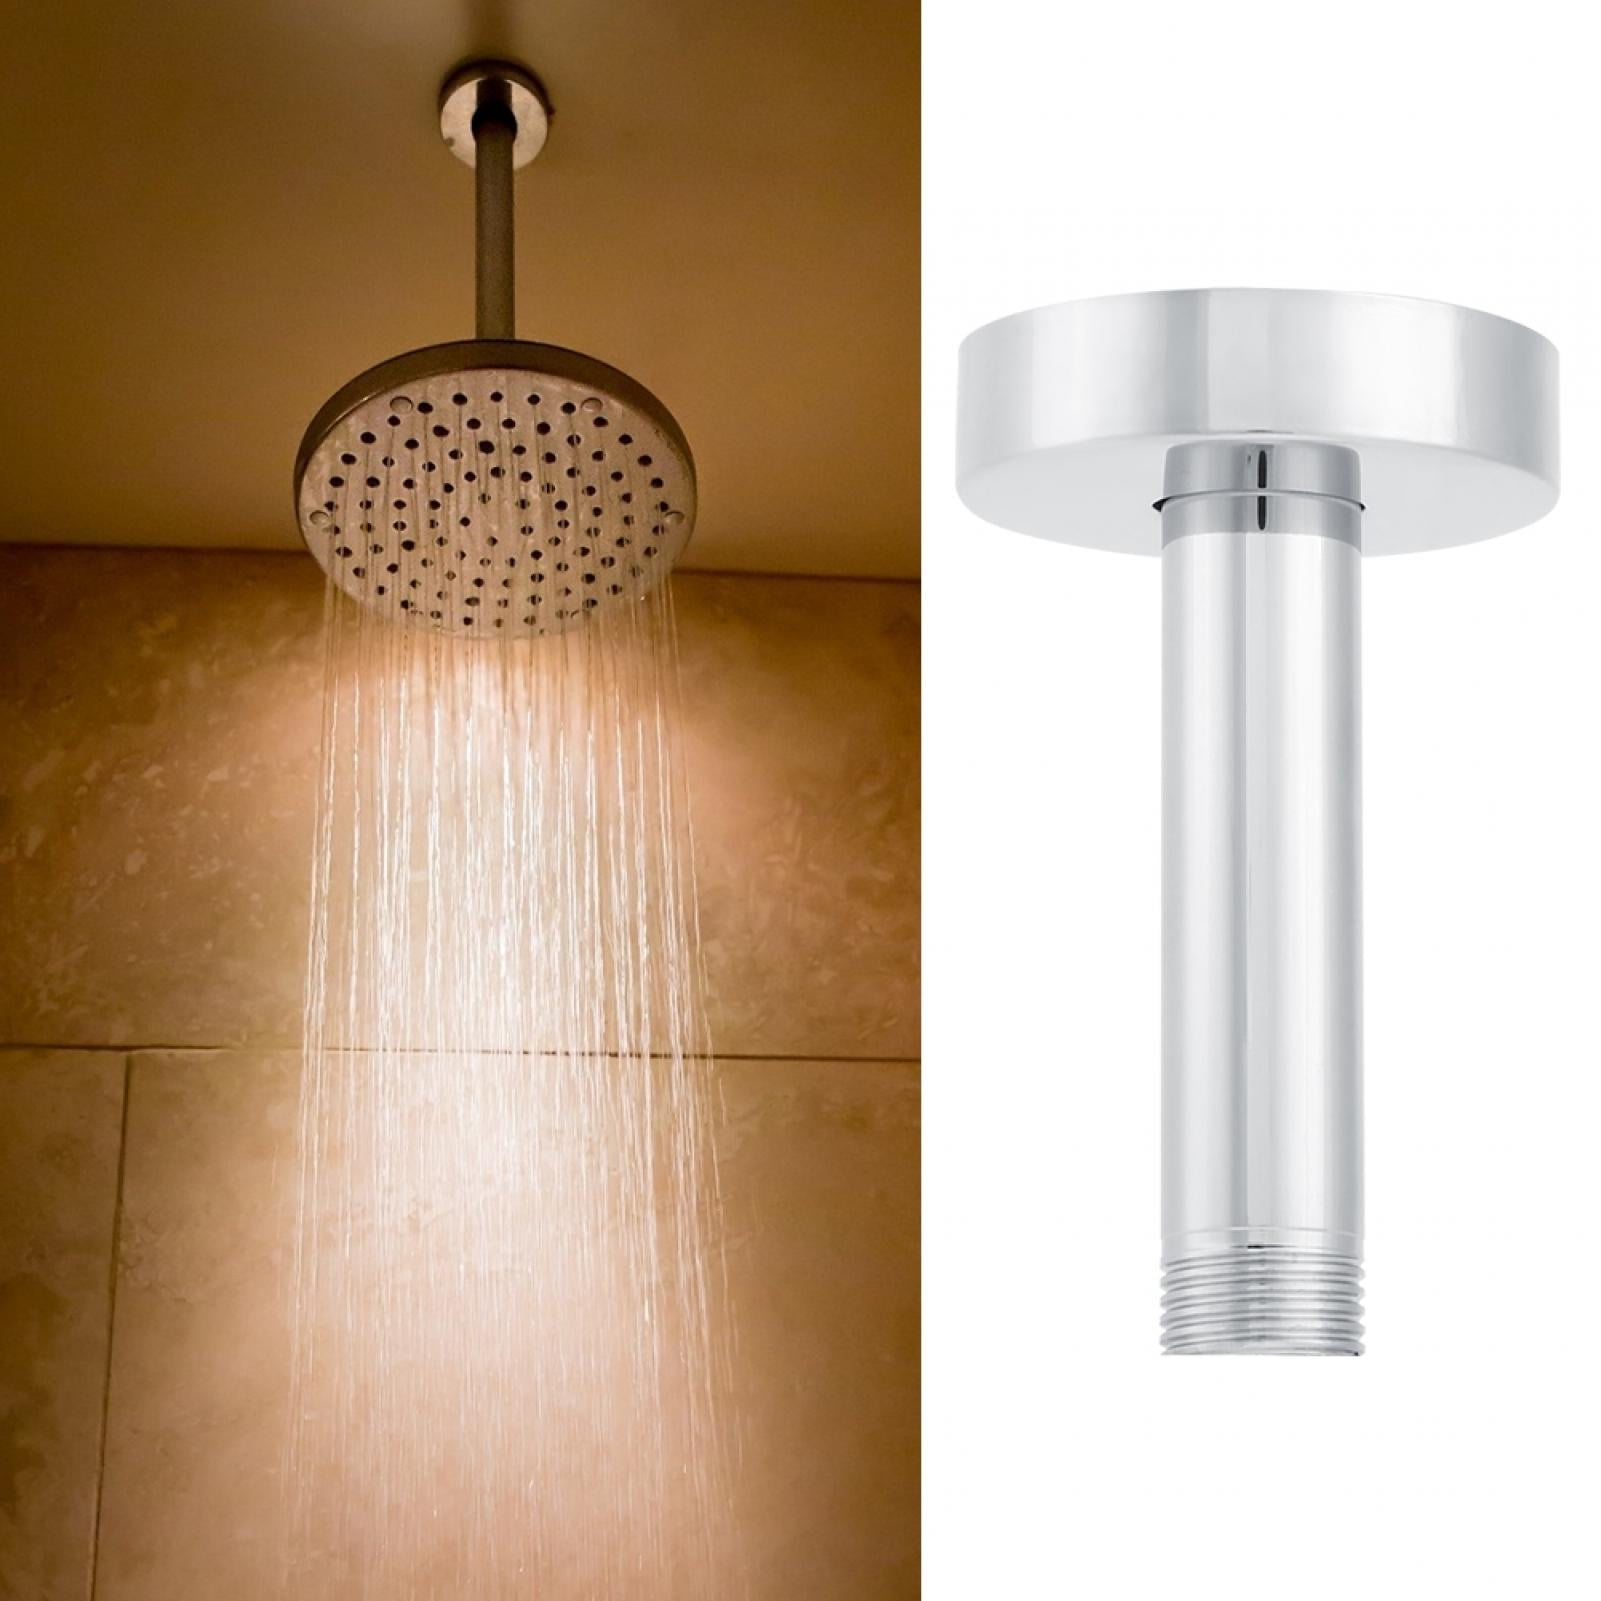 /2in Ceiling Mounted Stainless Steel Shower Arm Bathroom Shower Acces Home